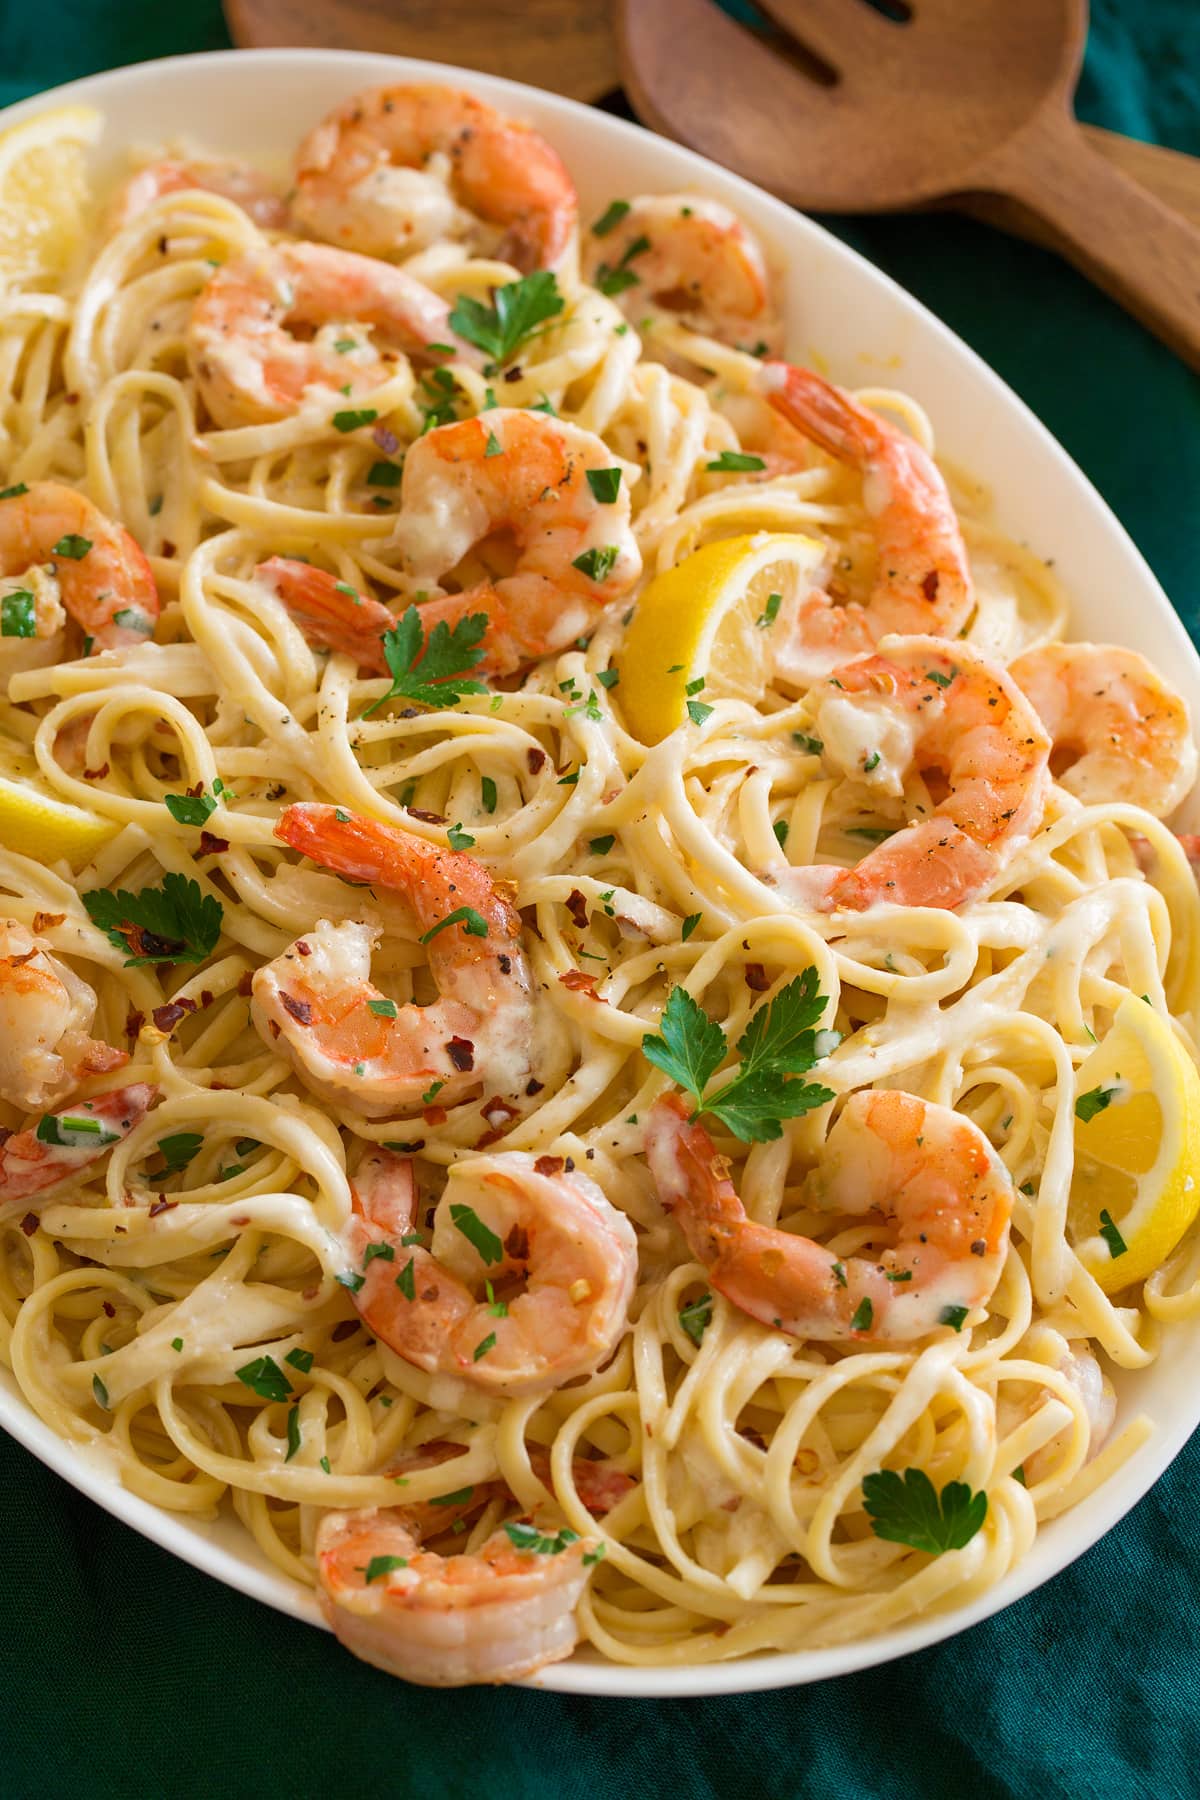 Shrimp pasta with lemons shown on a platter from a side view.